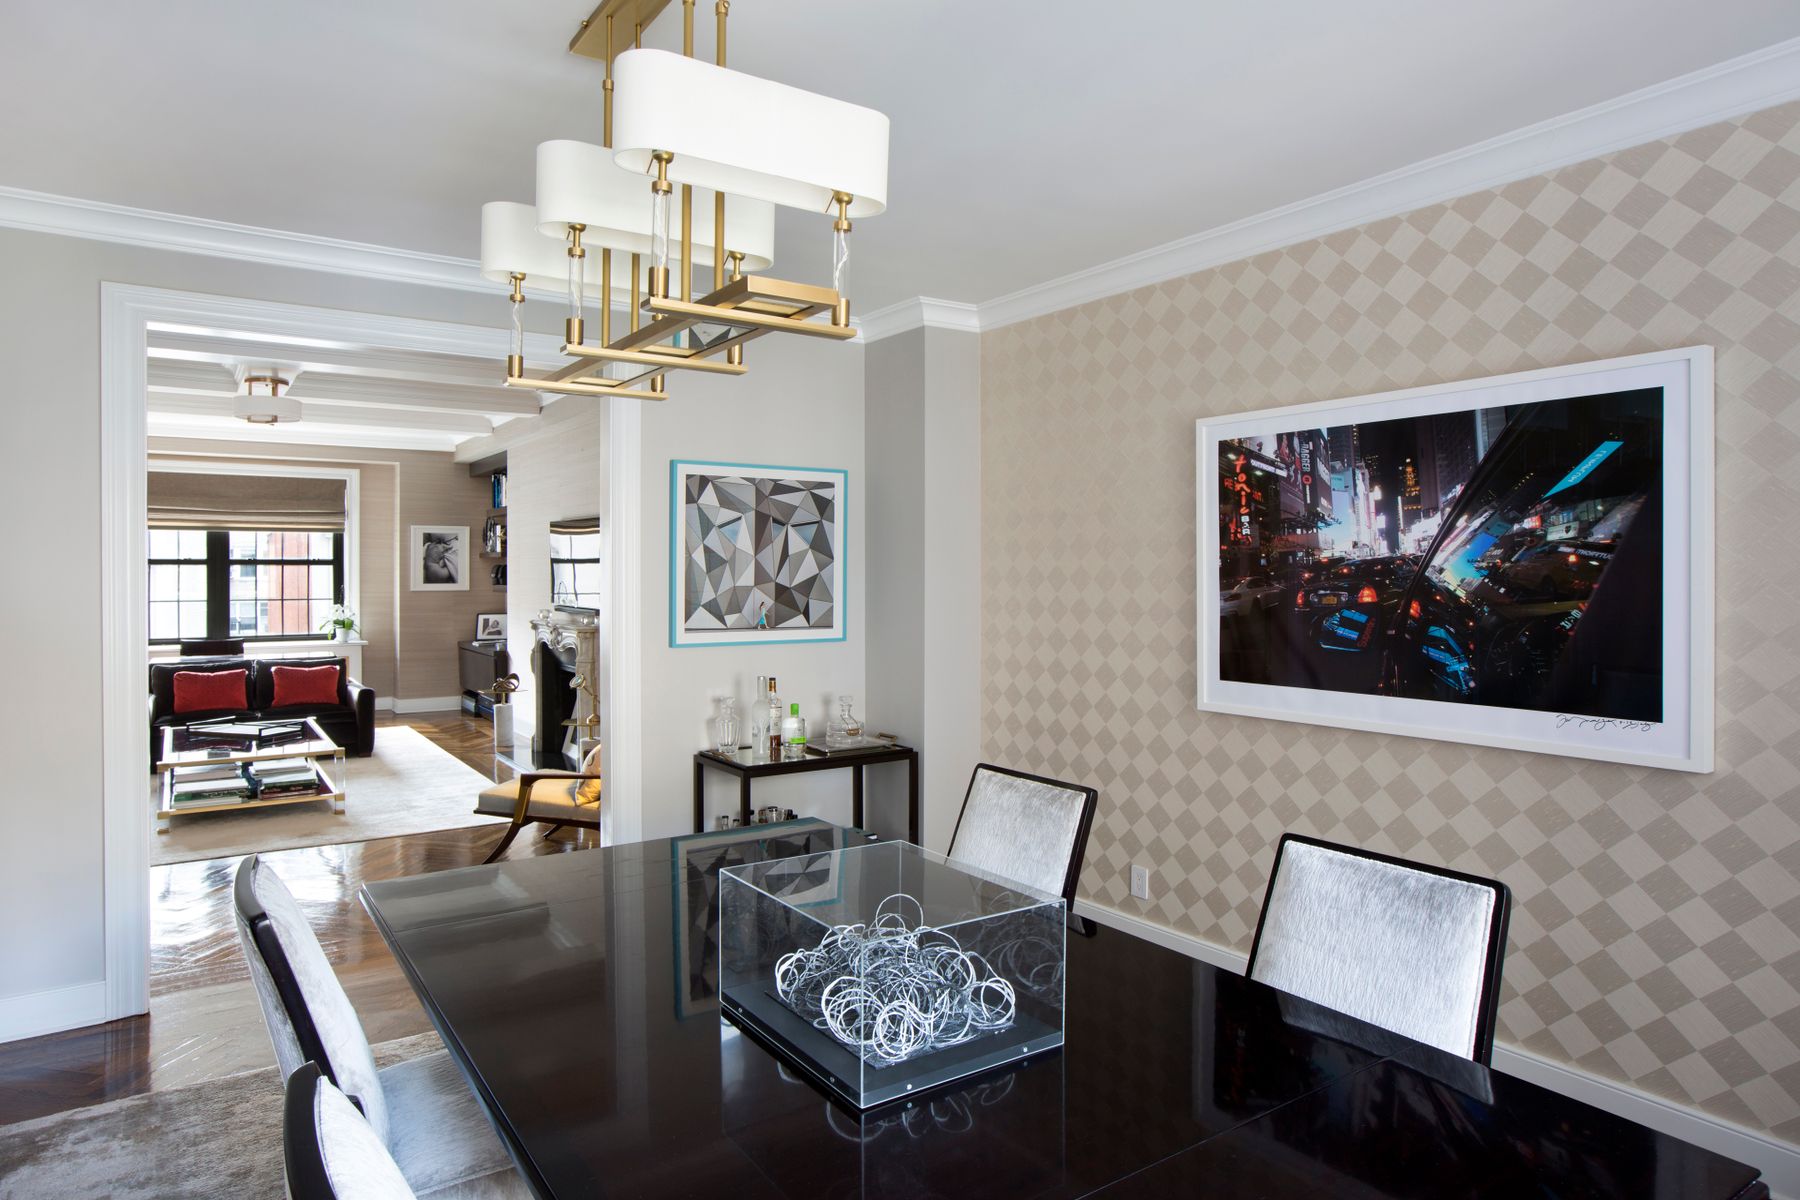 Martine Capdevielle_Luxury Real Estate NYC_21 East 66th St Apt 5w 3.jpg